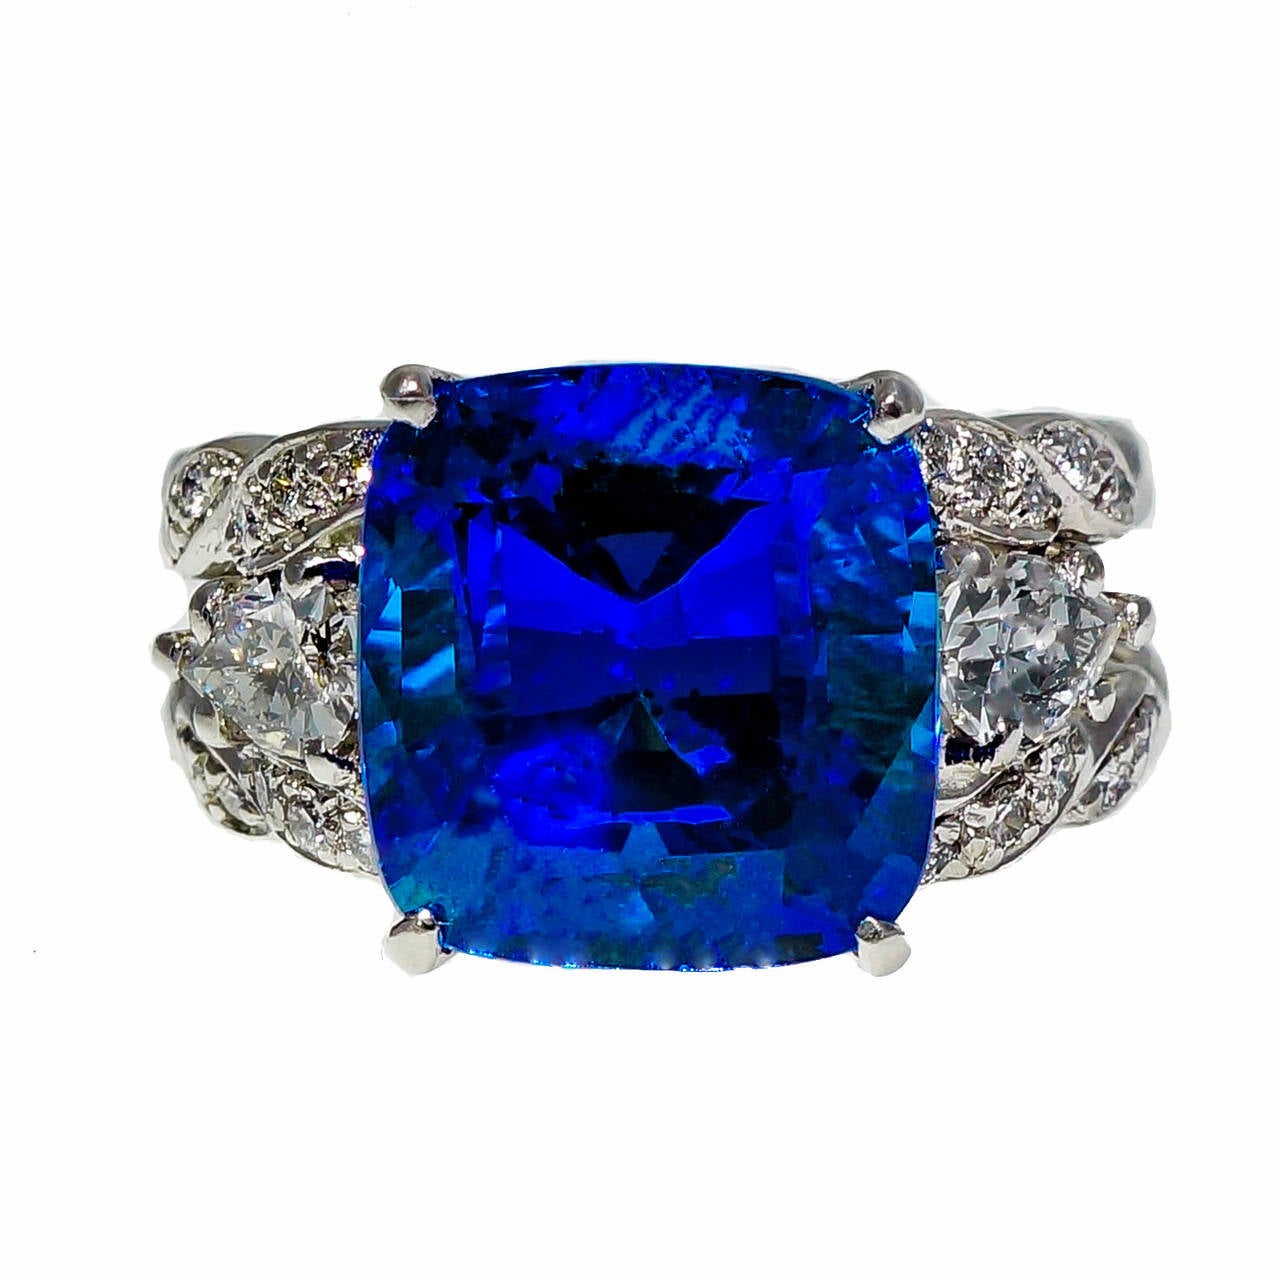 Tanzanite ring in exceptionally good condition. One of the finest we have ever seen. The ring dates to the early 1970’s. The color of the Tanzanite and family story are that this stone is from the original Tanzanite mine. Pure blue and extra bright.